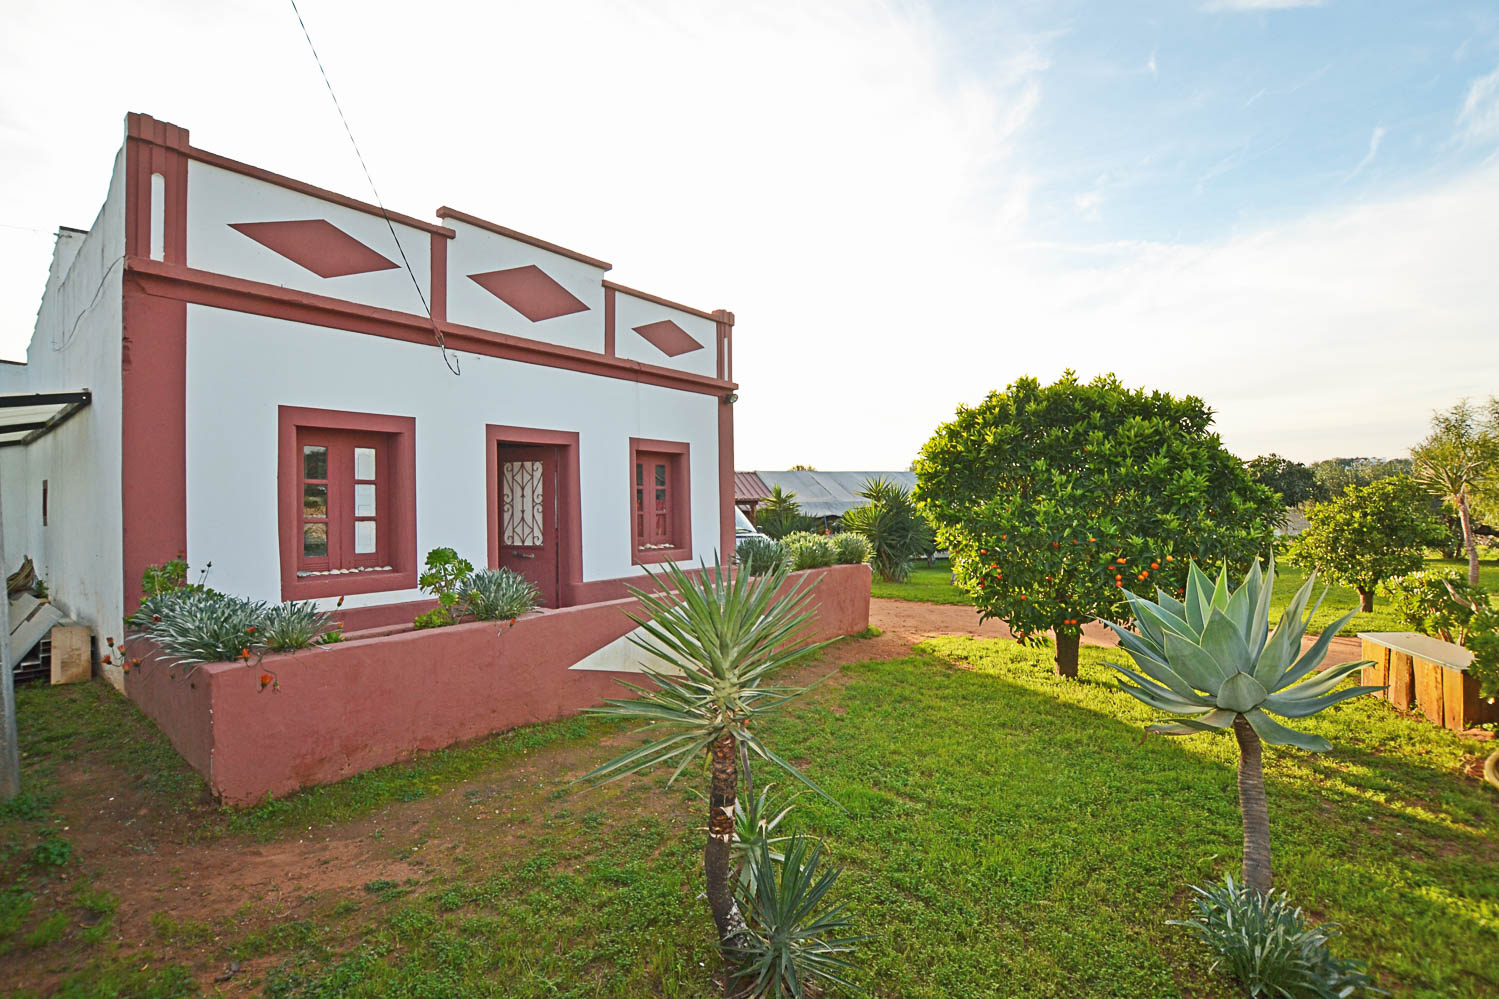 Two Bedroom Traditional Cottage for Renovation with Large Plot, Moncarapacho 